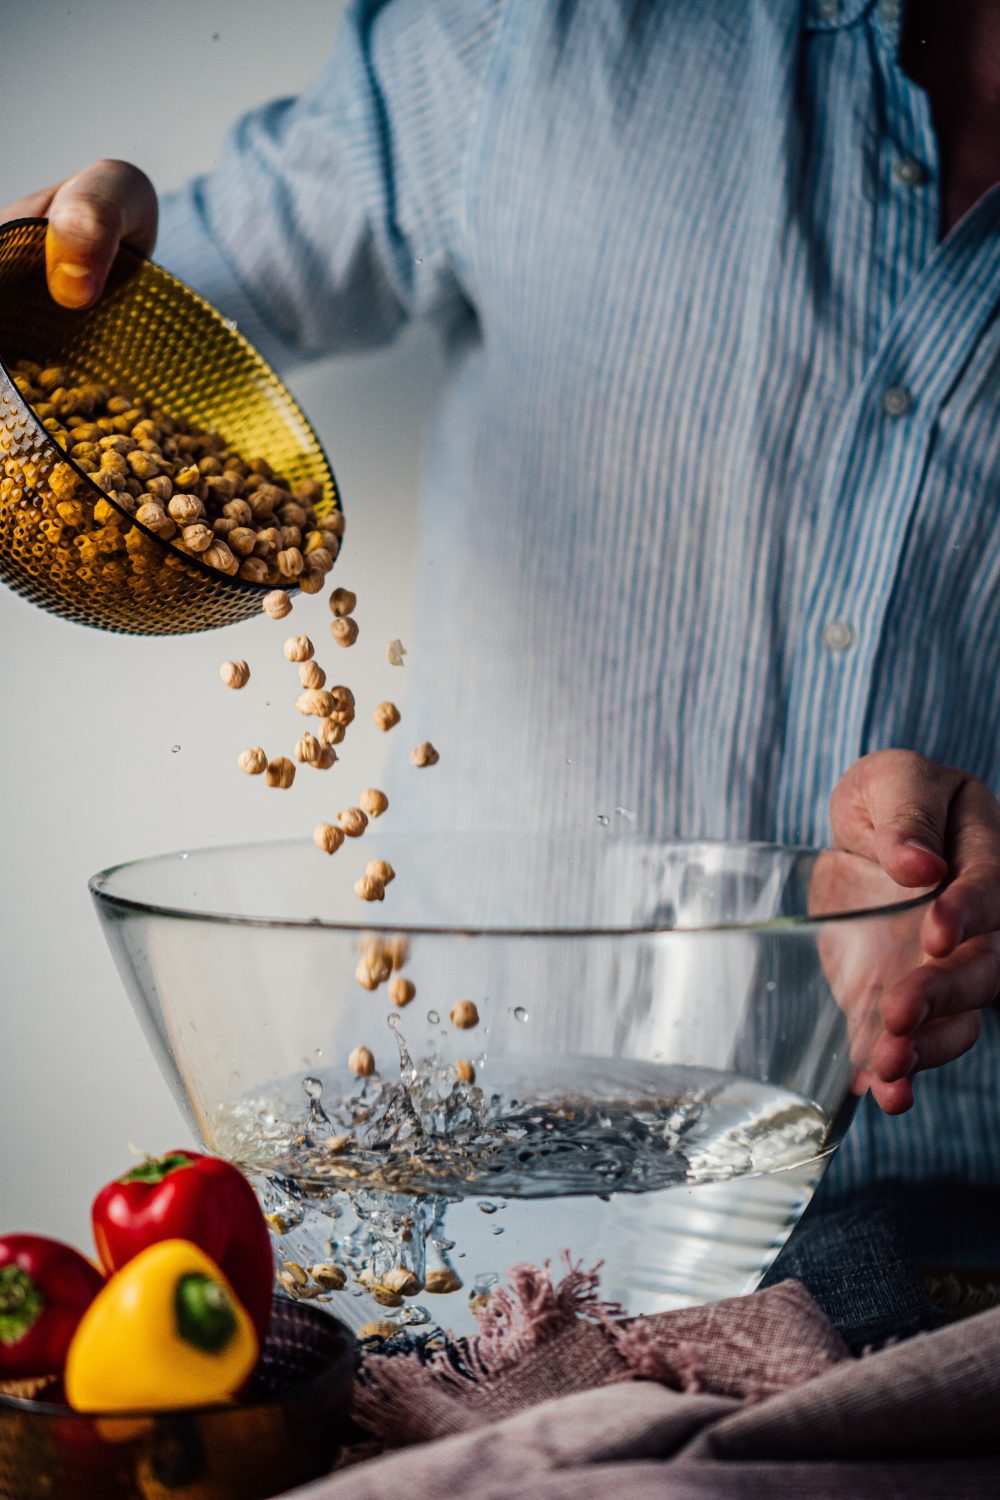 pouring-chickpeas-into-bowl-of-water